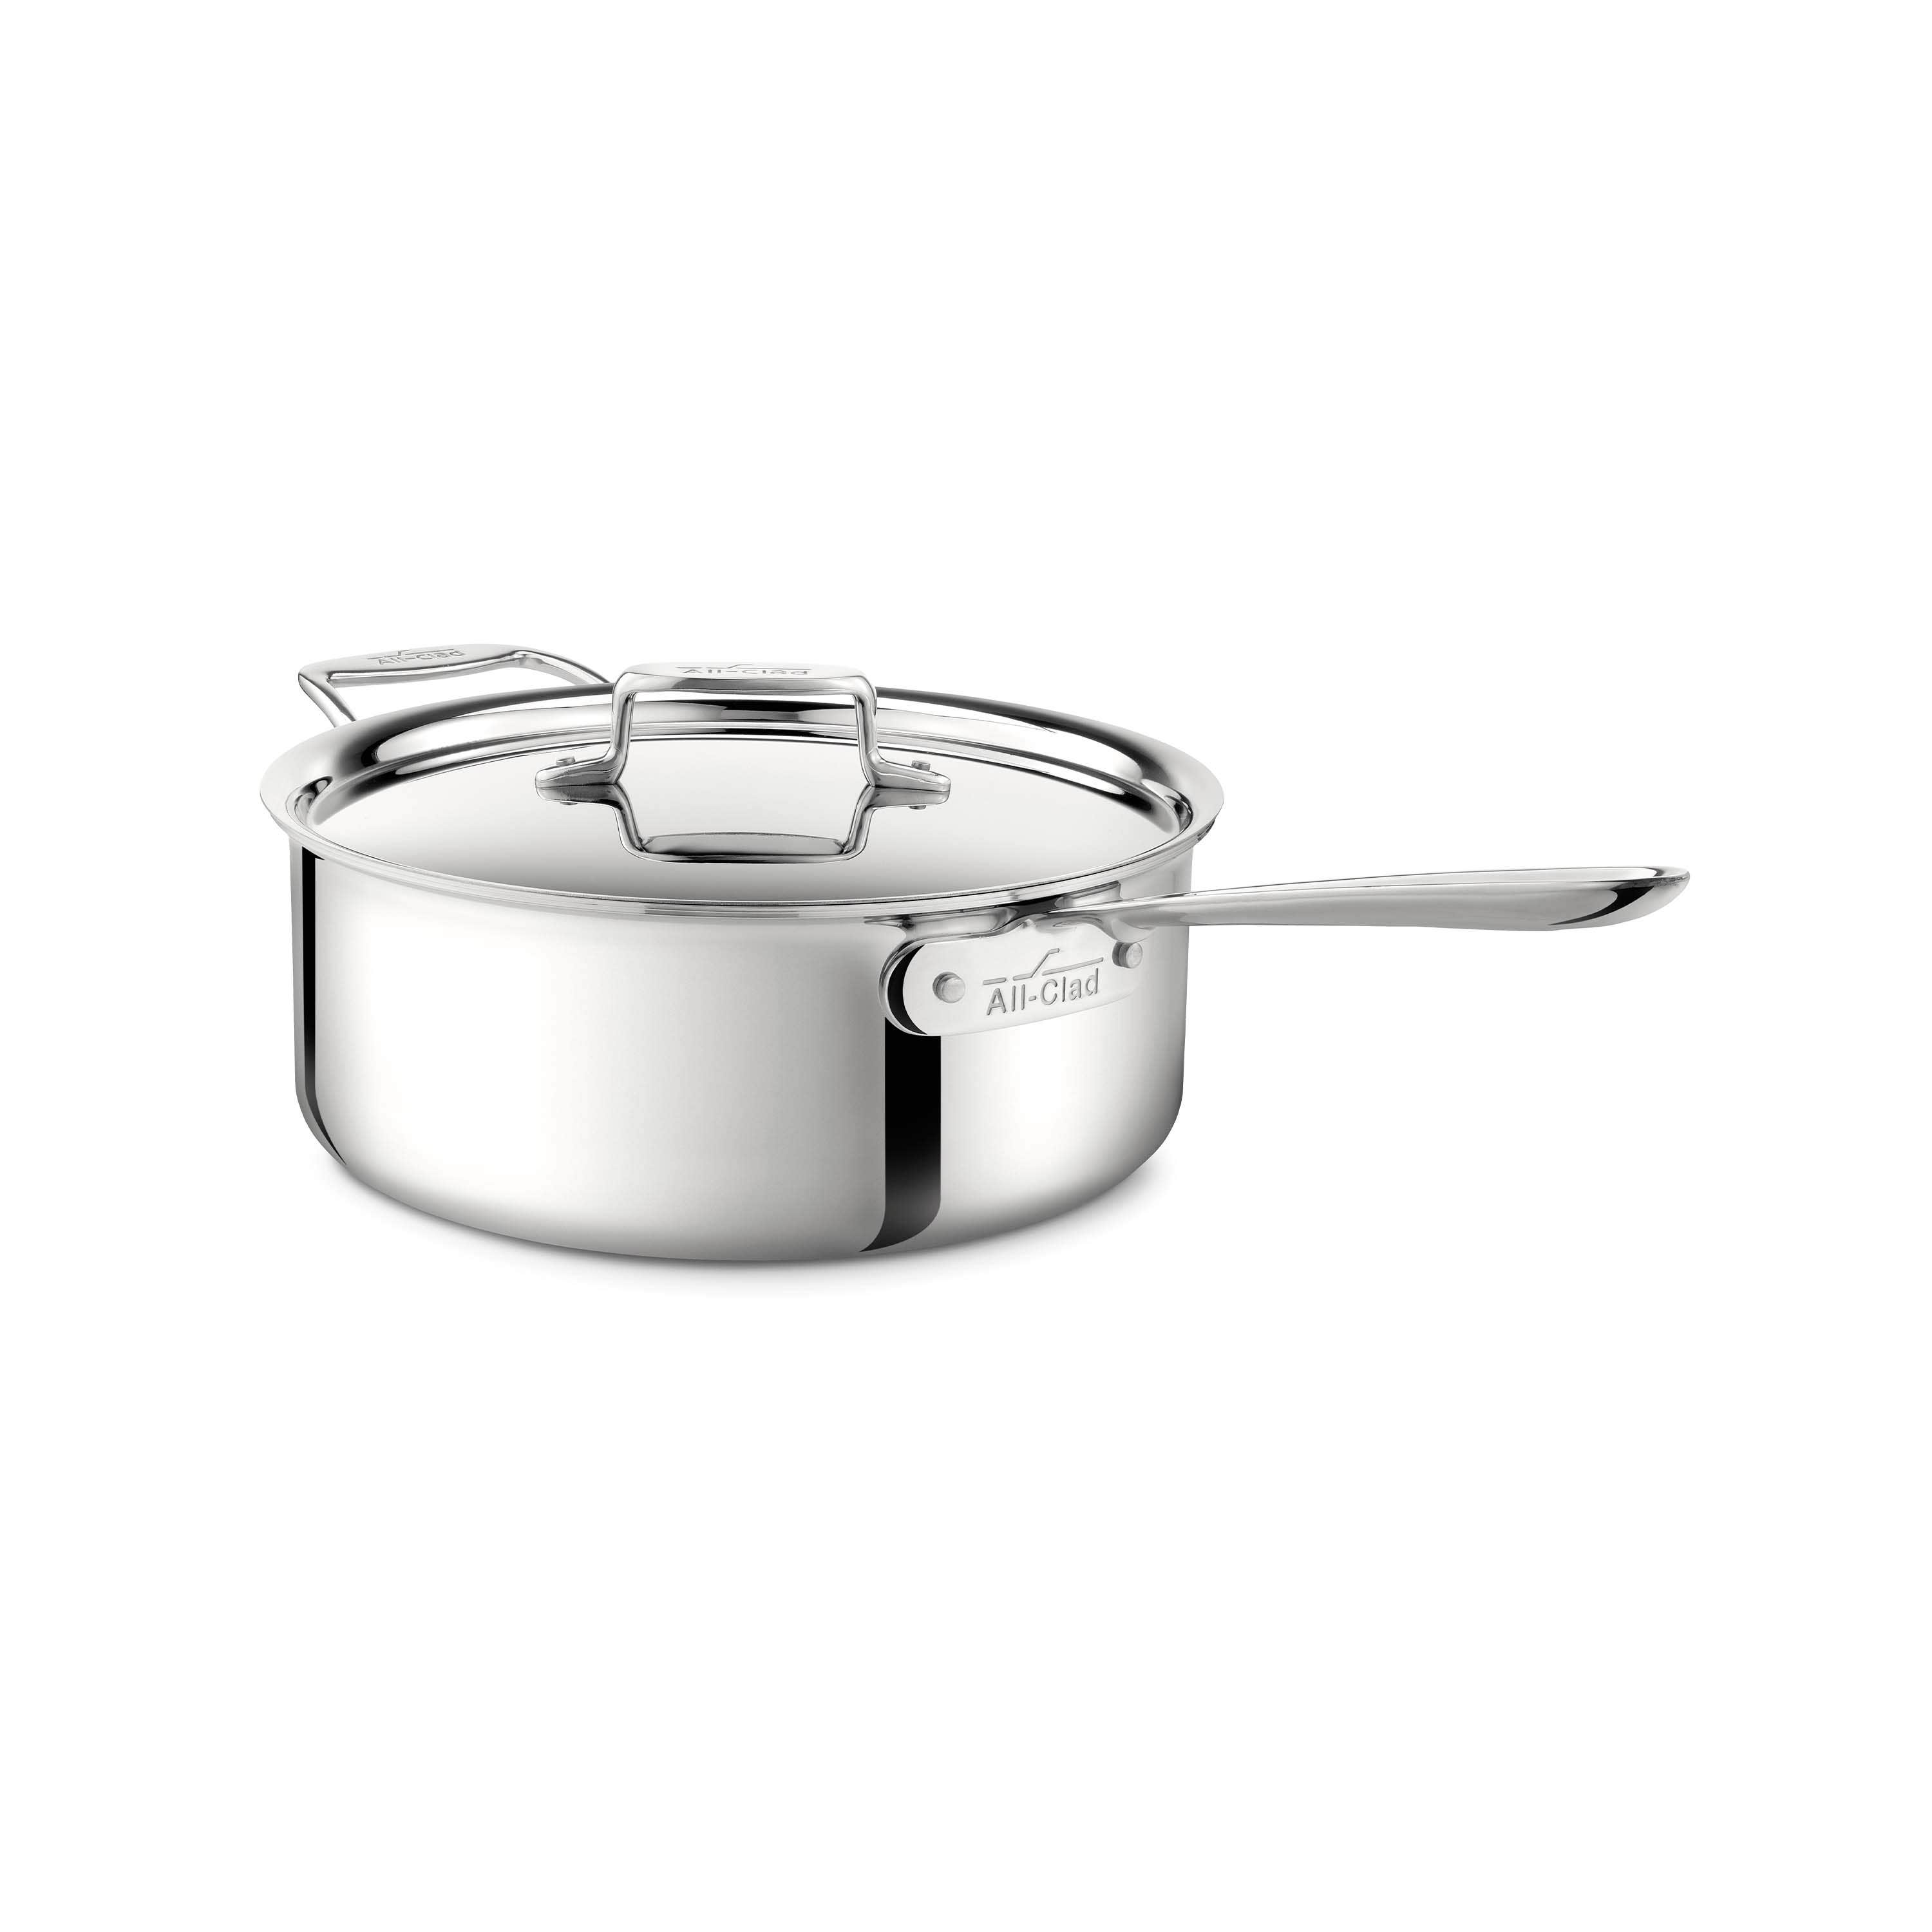 $235 All-Clad Stainless Steel Tri-Ply Bonded Covered Saucepan Pot Lid 3 QT Quart 